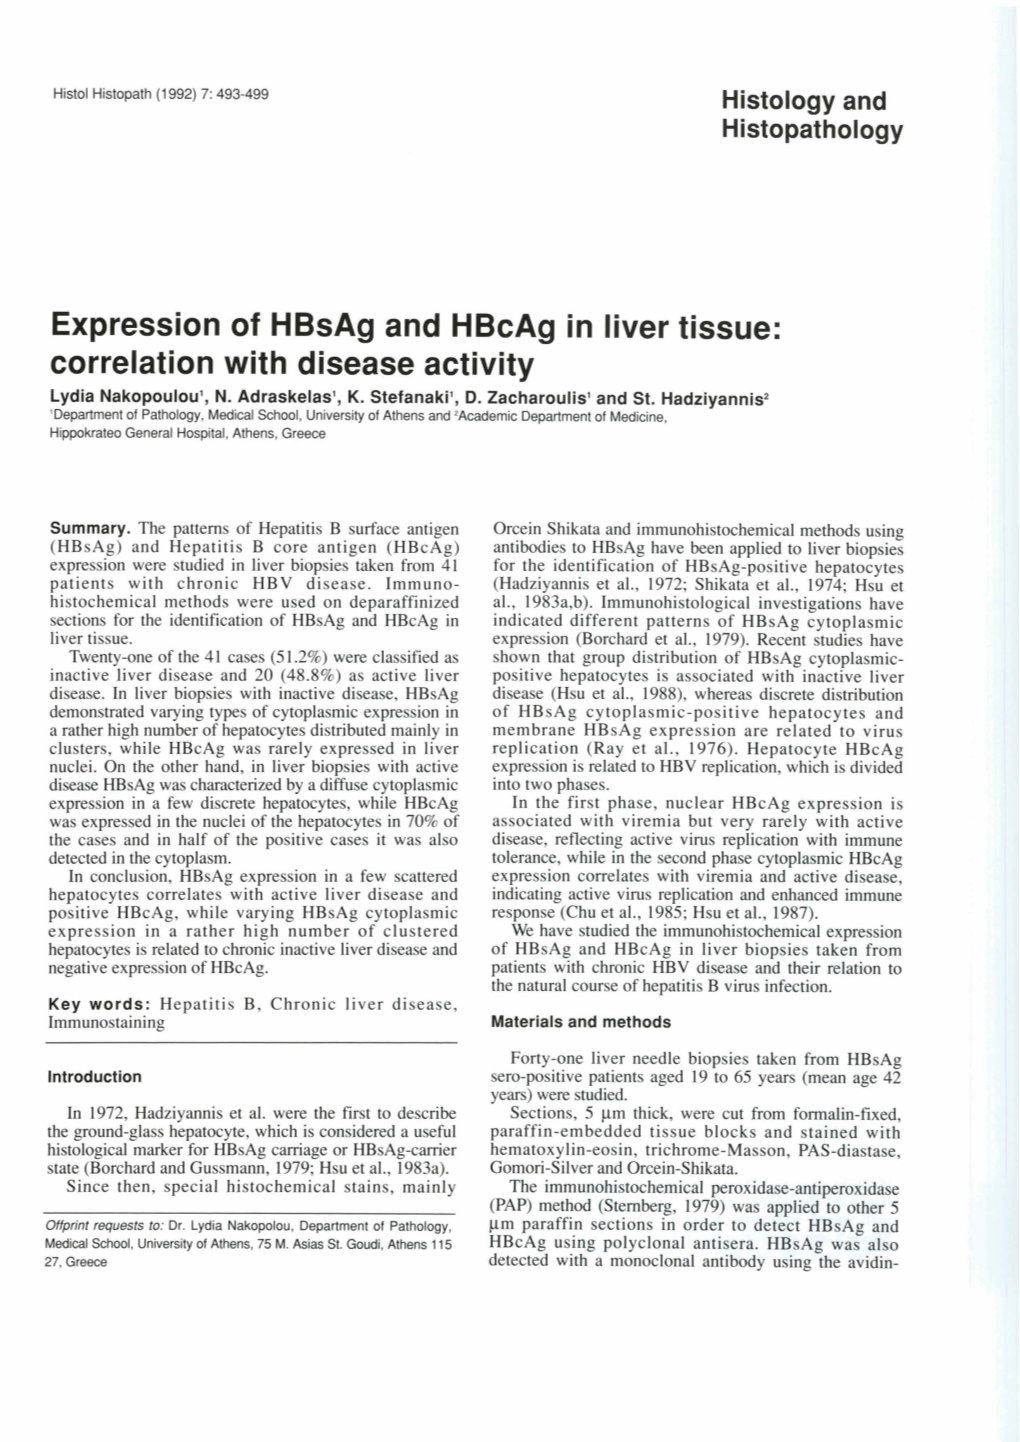 Expression of Hbsag and Hbcag in Liver Tissue: Correlation with Disease Activity Lydia Nakopouloul, N